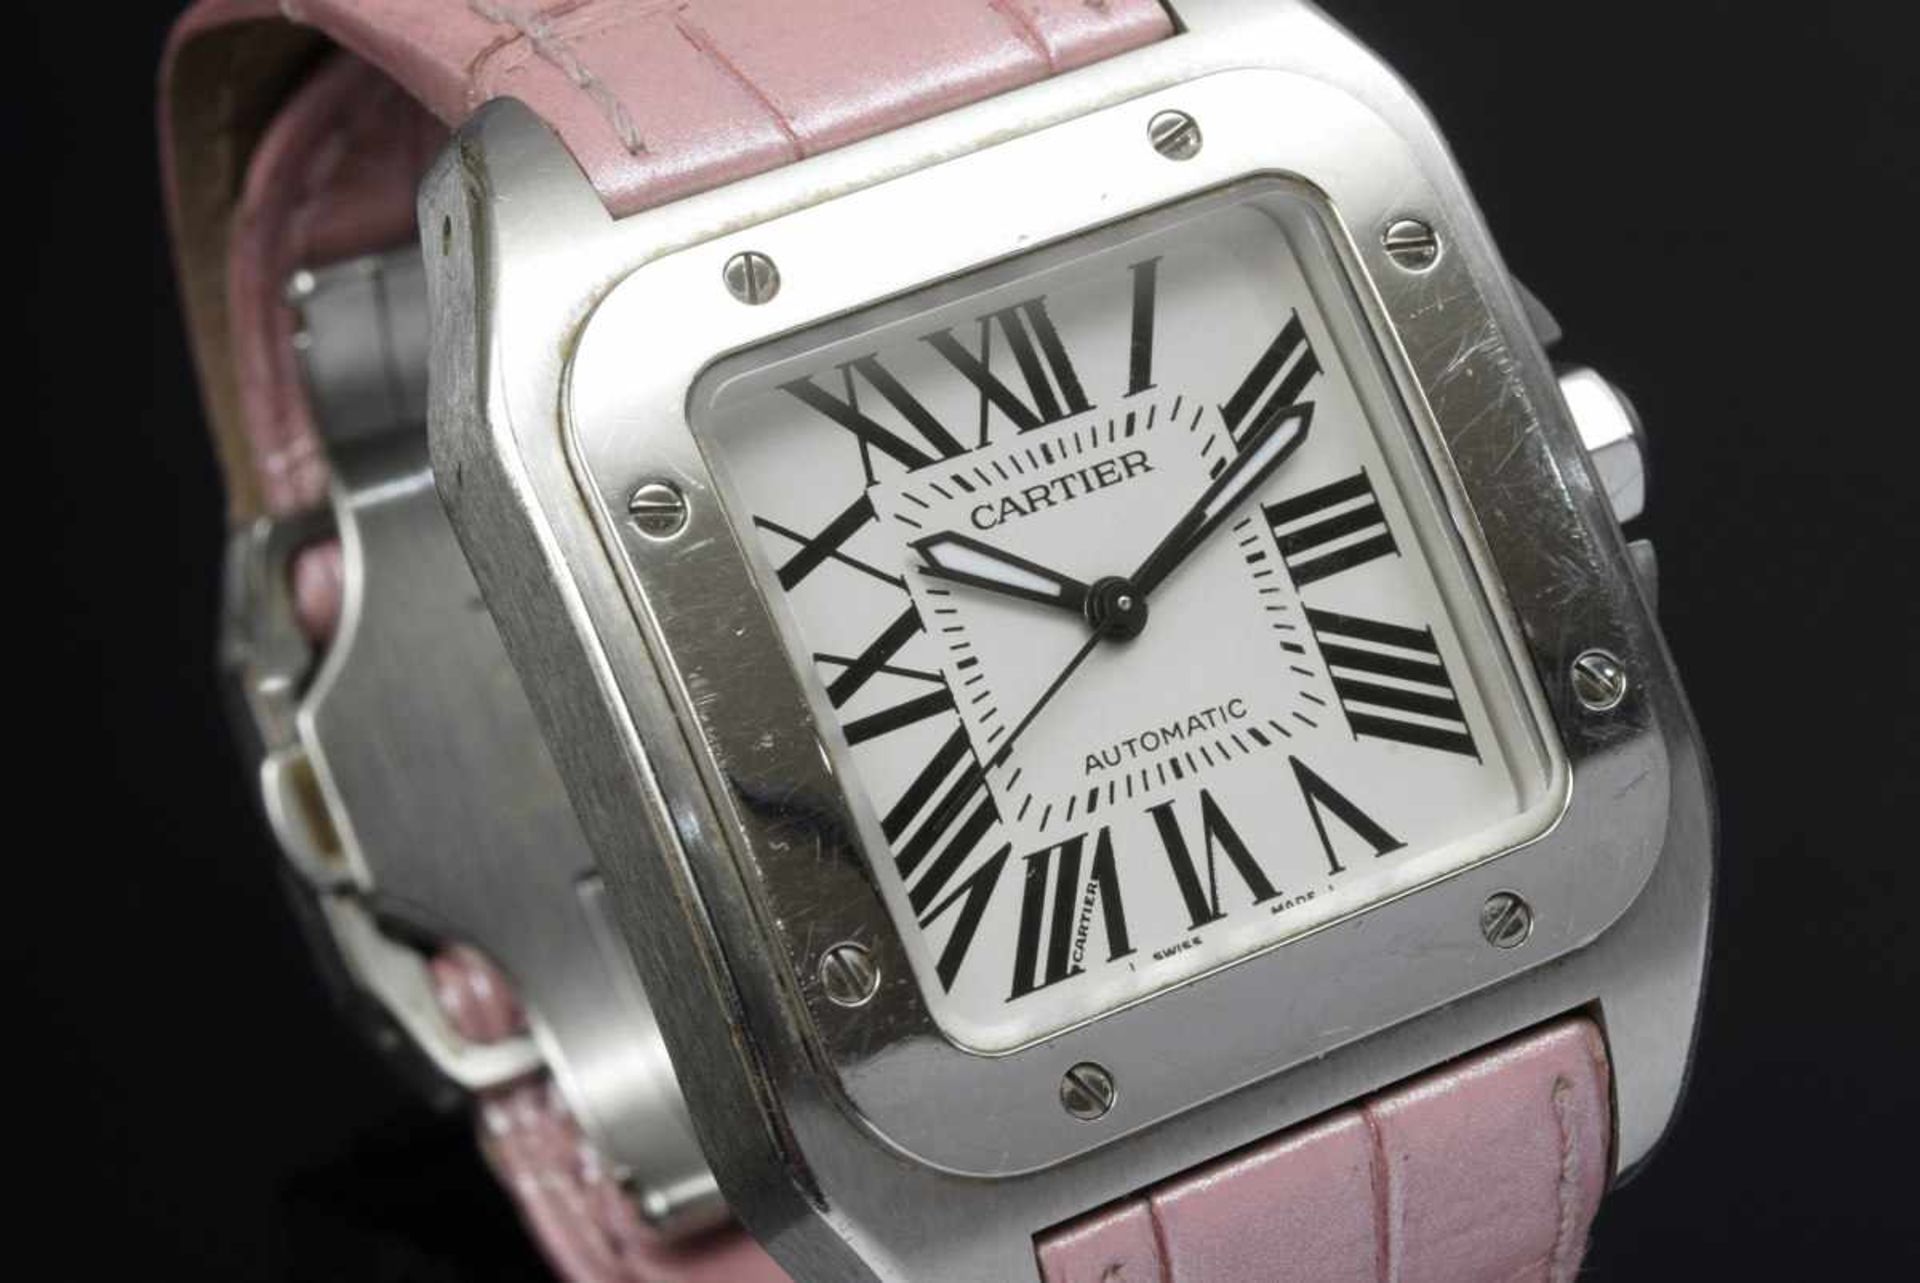 Cartier "Santos 100" watch, stainless steel, automatic movement, silver-coloured dial with Roman